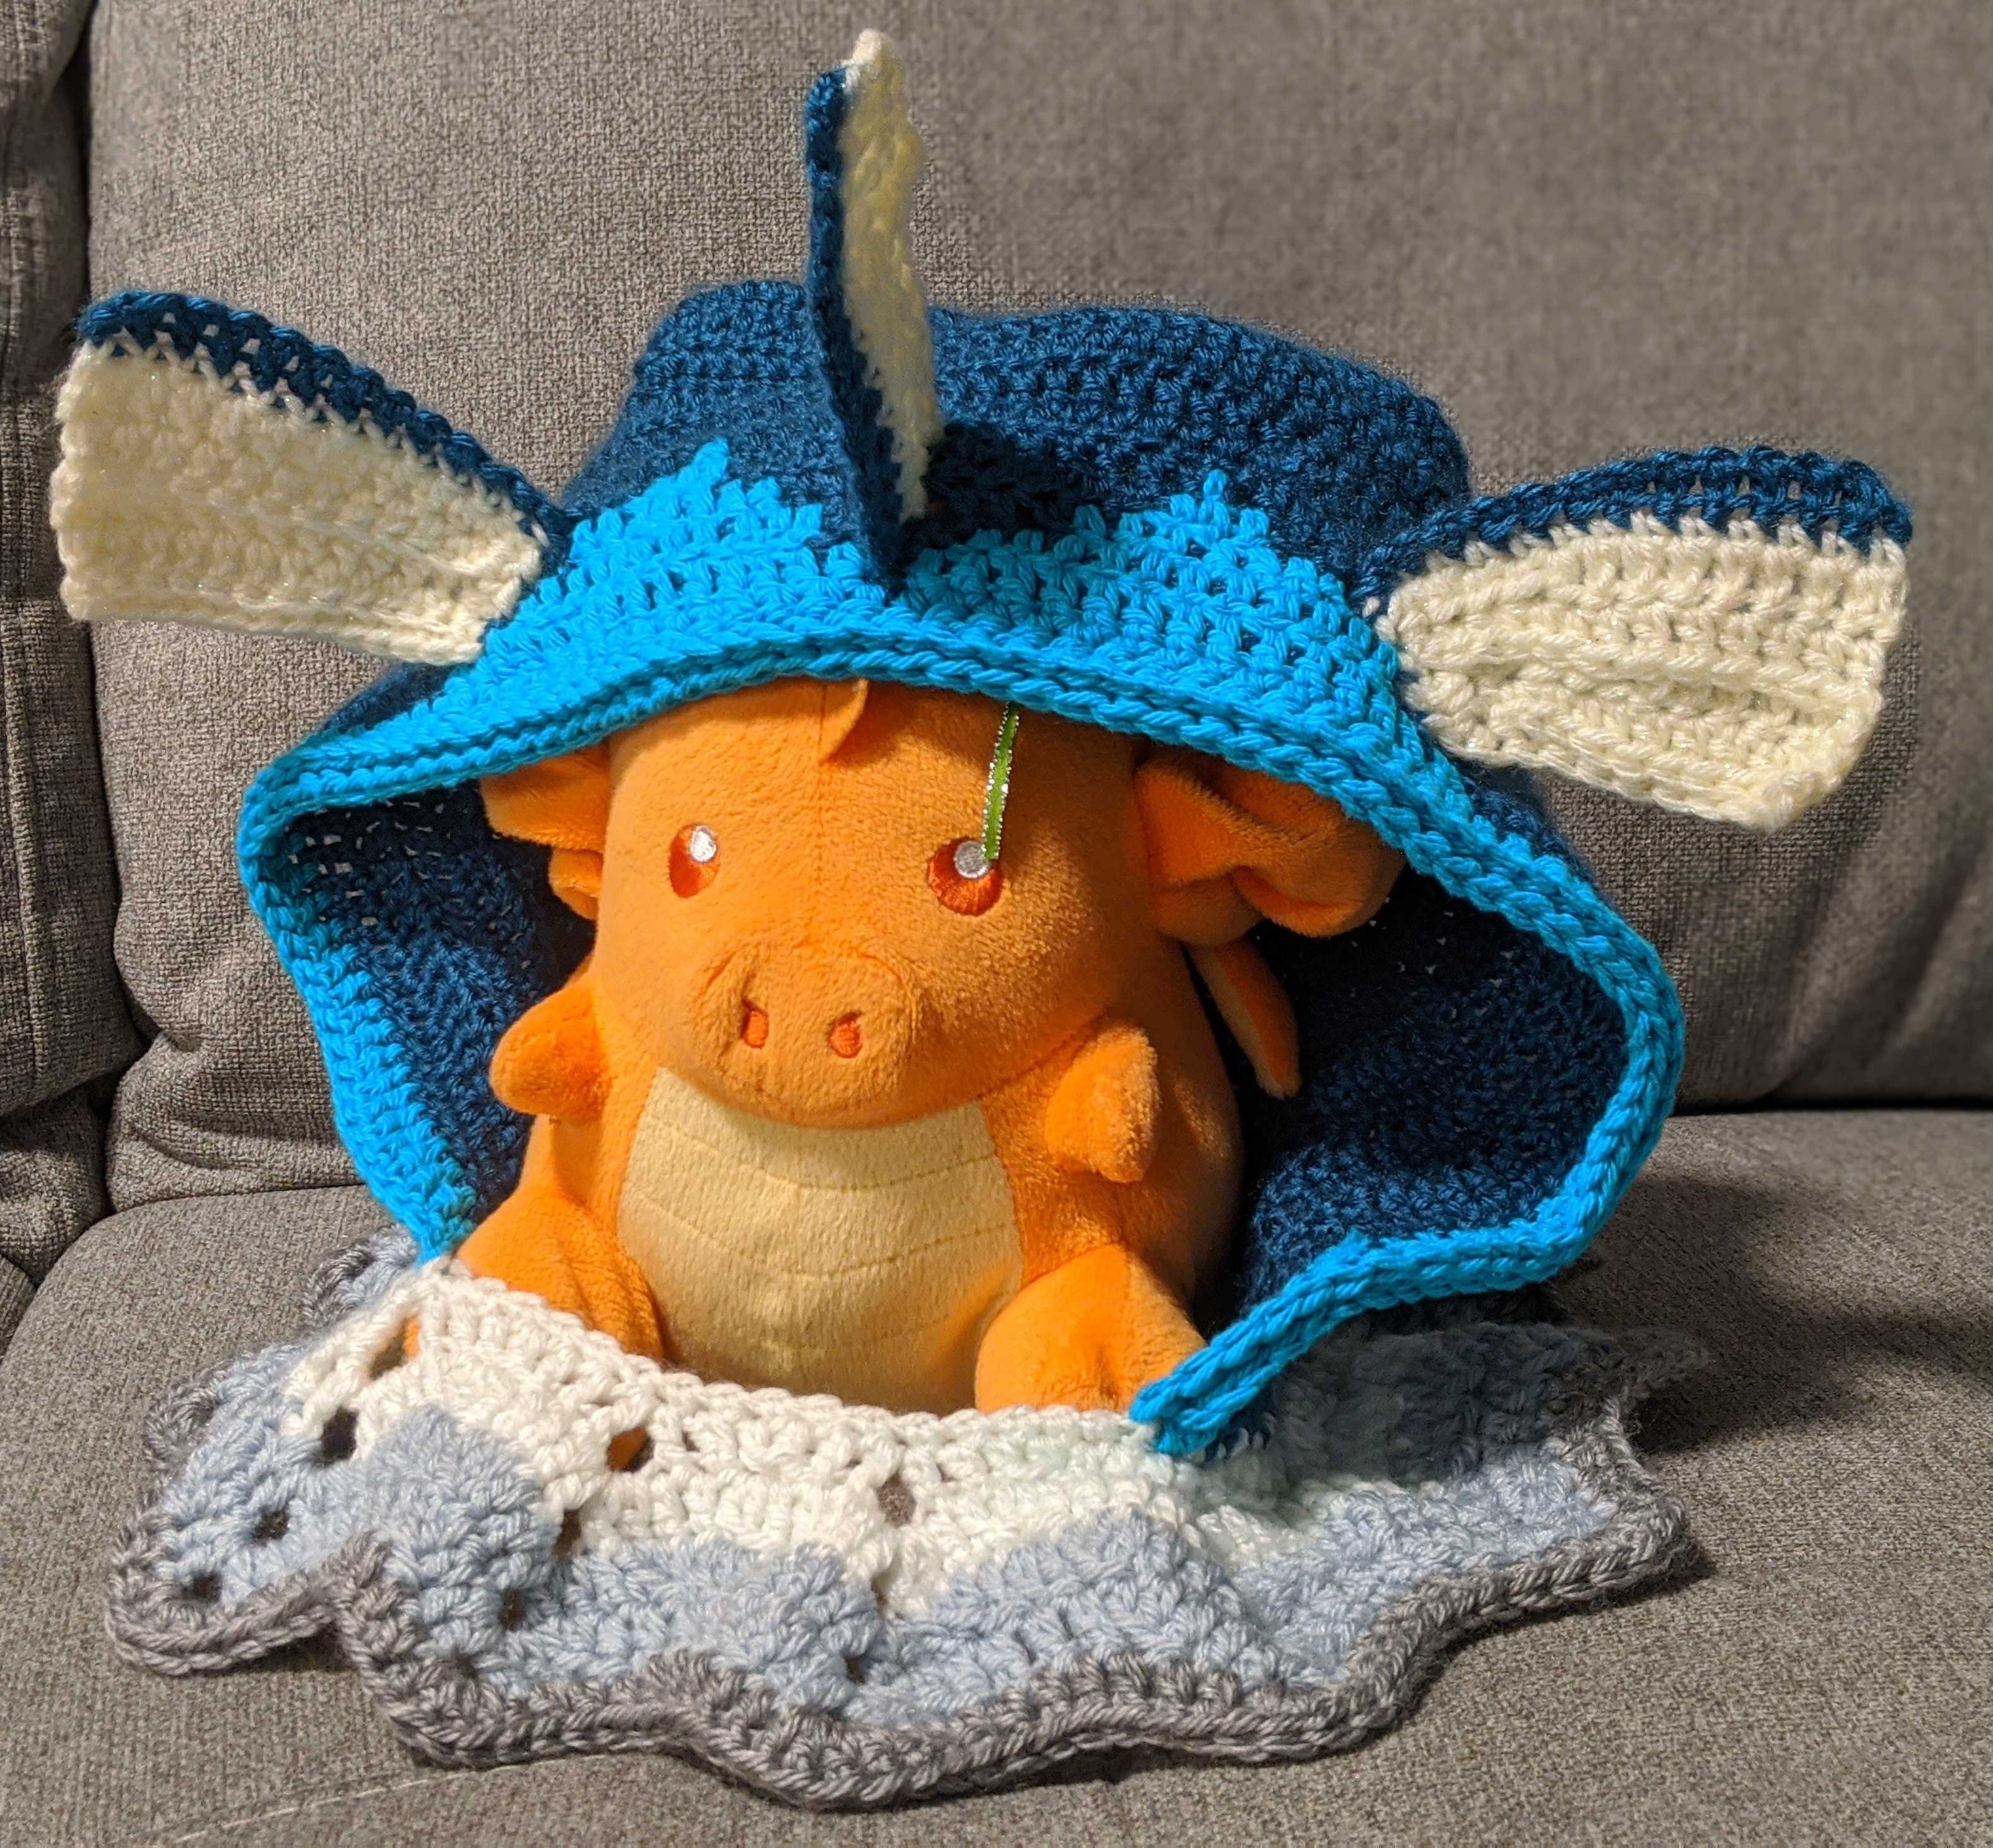 I made this for a craft exchange. I modified a hooded pattern and free-handed the fins.